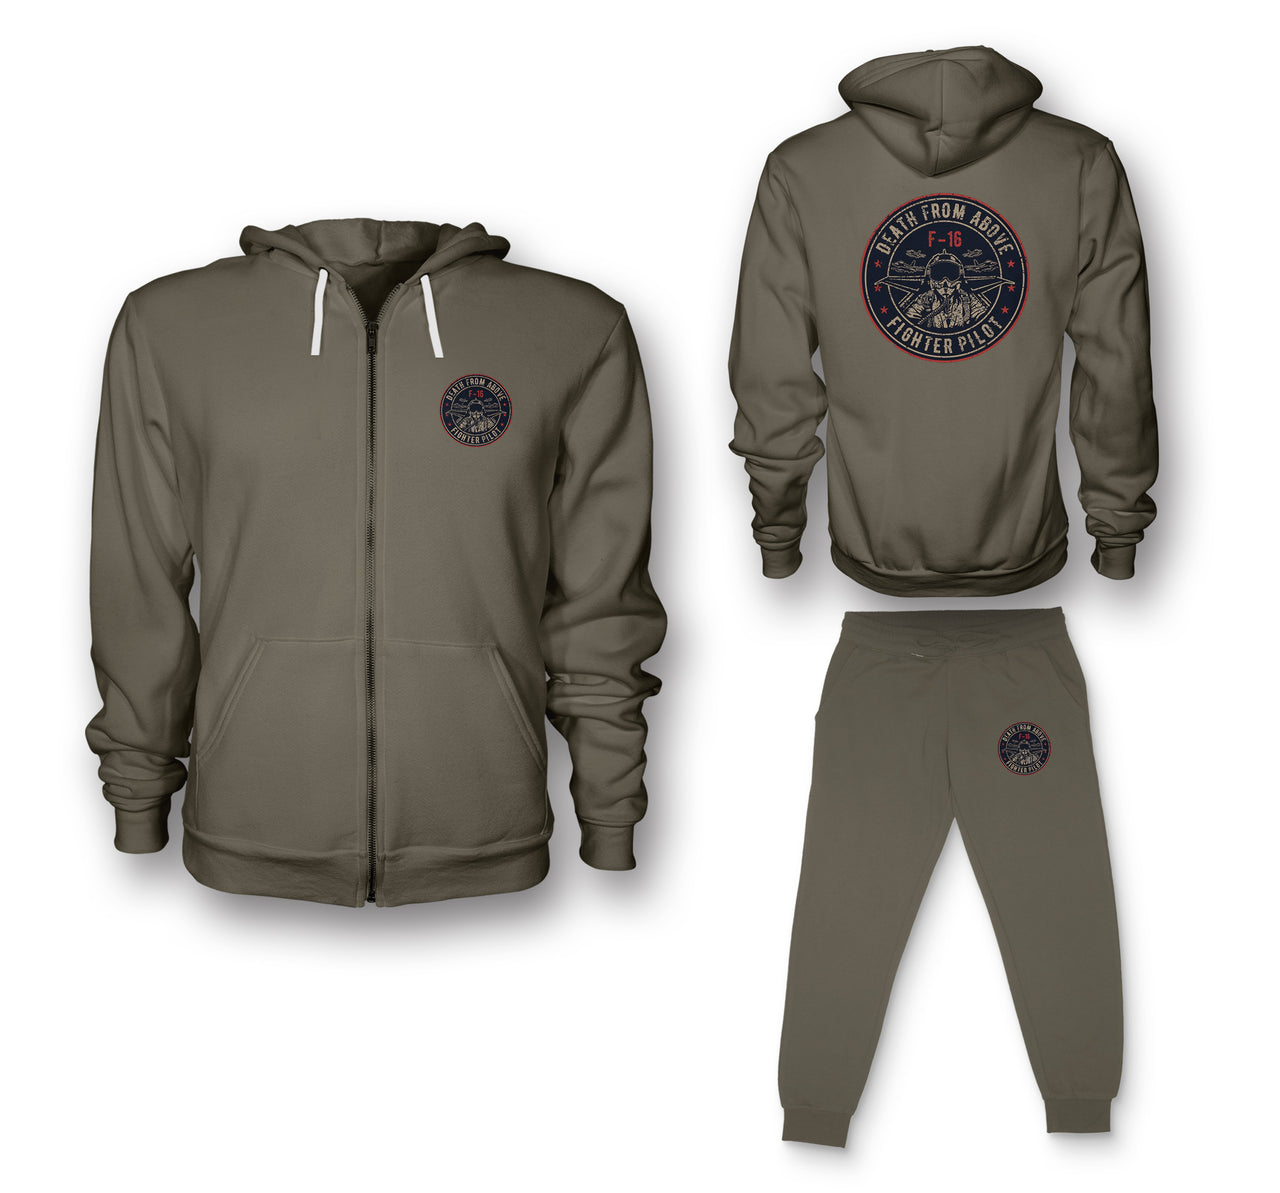 Fighting Falcon F16 - Death From Above Designed Zipped Hoodies & Sweatpants Set